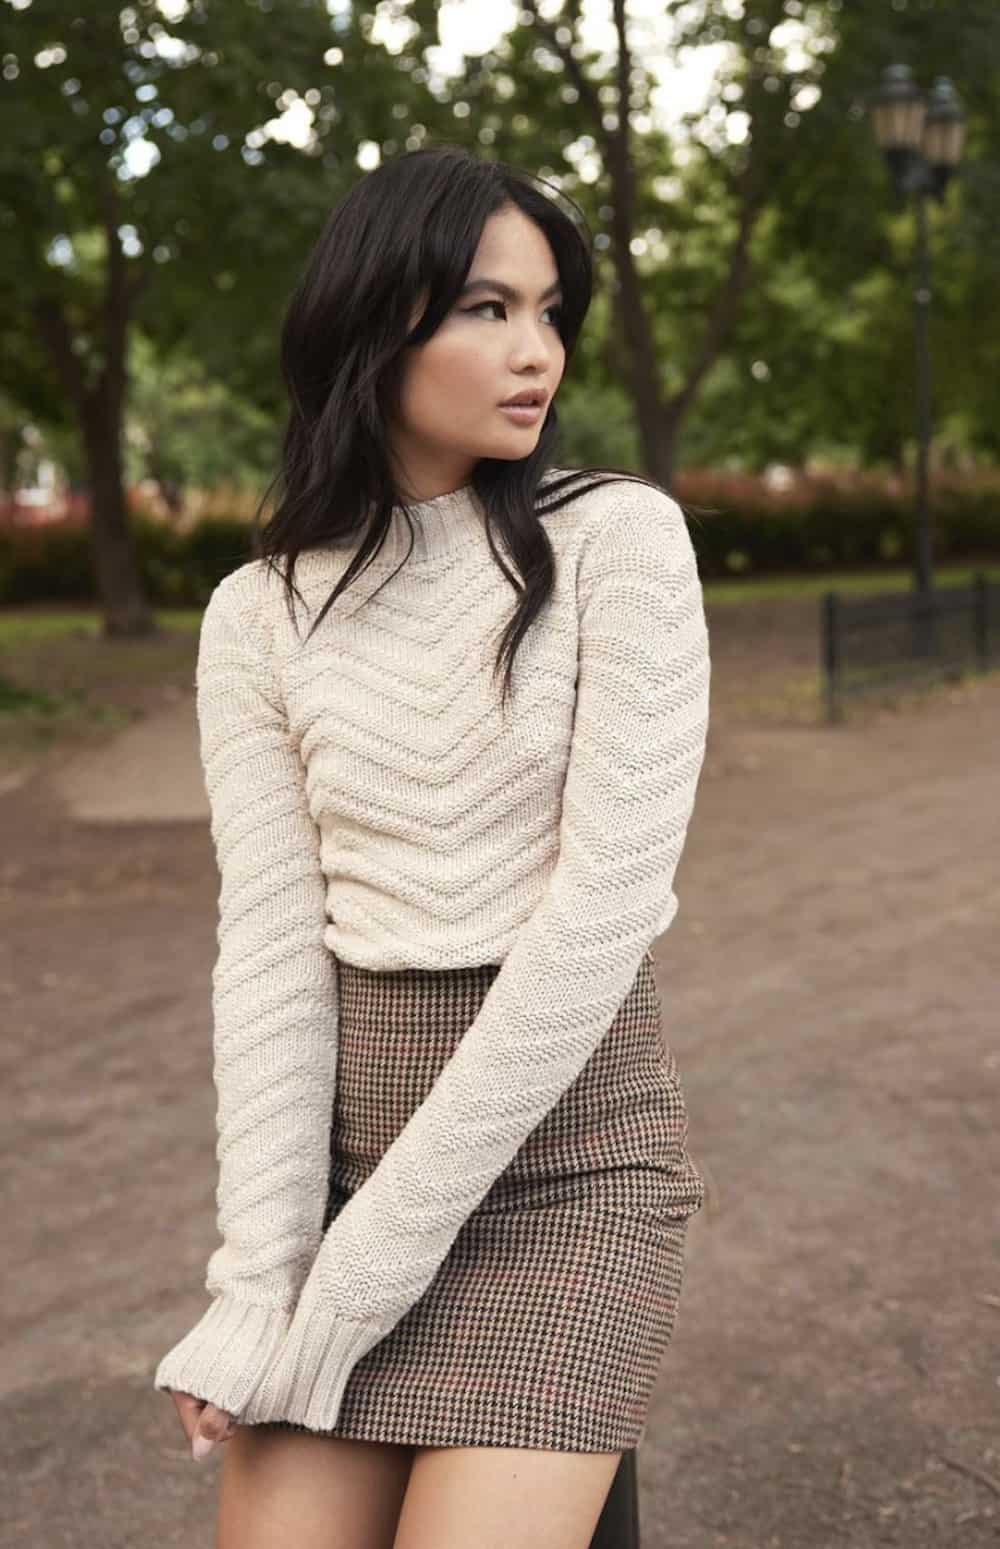 Woman wearing a white sweater and a plaid skirt.